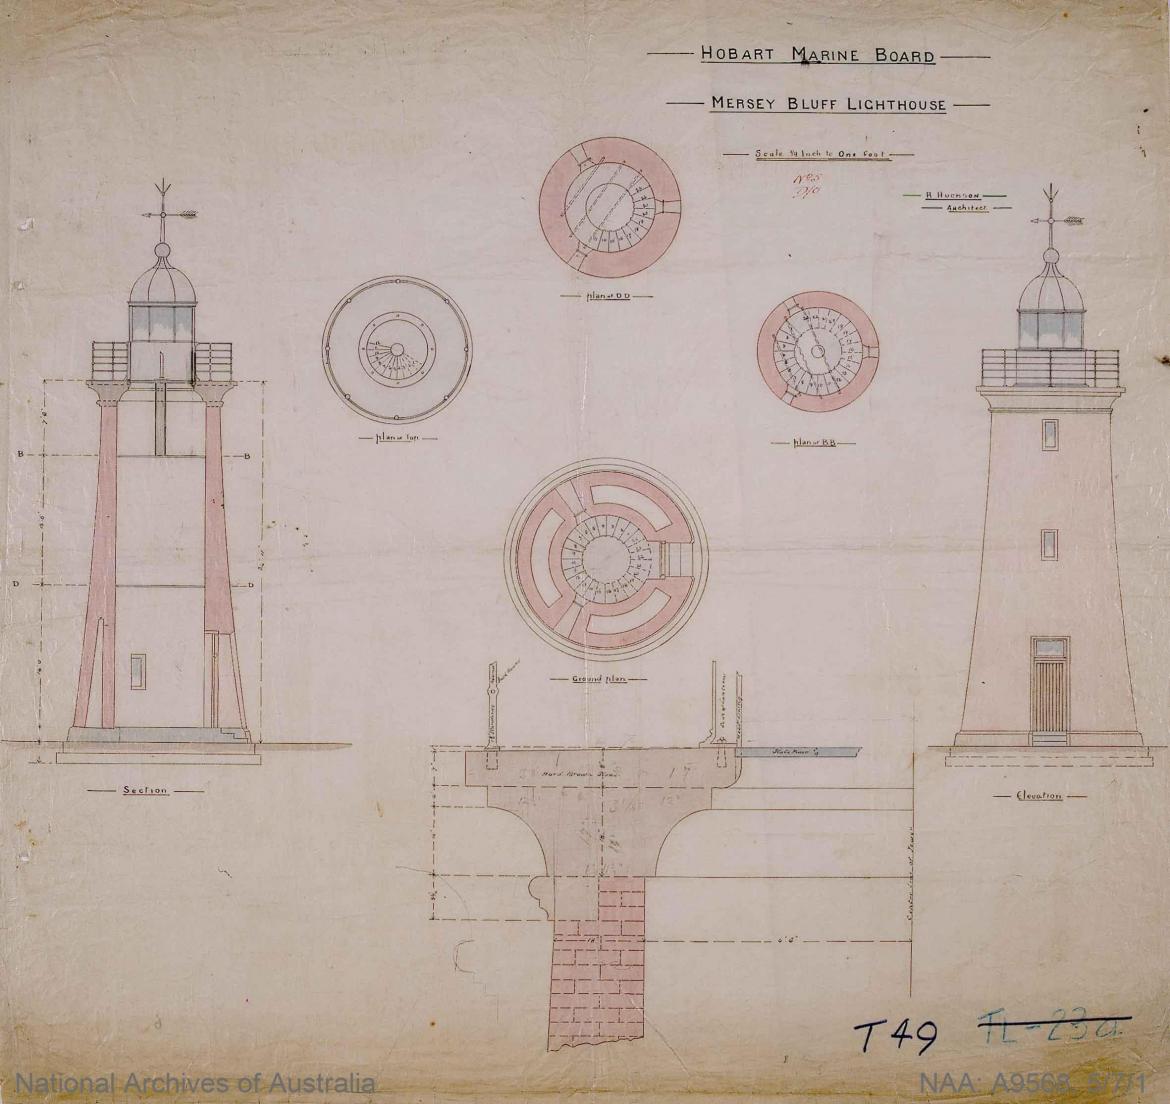 Figure 11. Huckson & Hutchison design blueprint for Mersey Bluff Lighthouse 1889. NAA: A9568, 5/7/1 (© Commonwealth of Australia, National Archives of Australia)